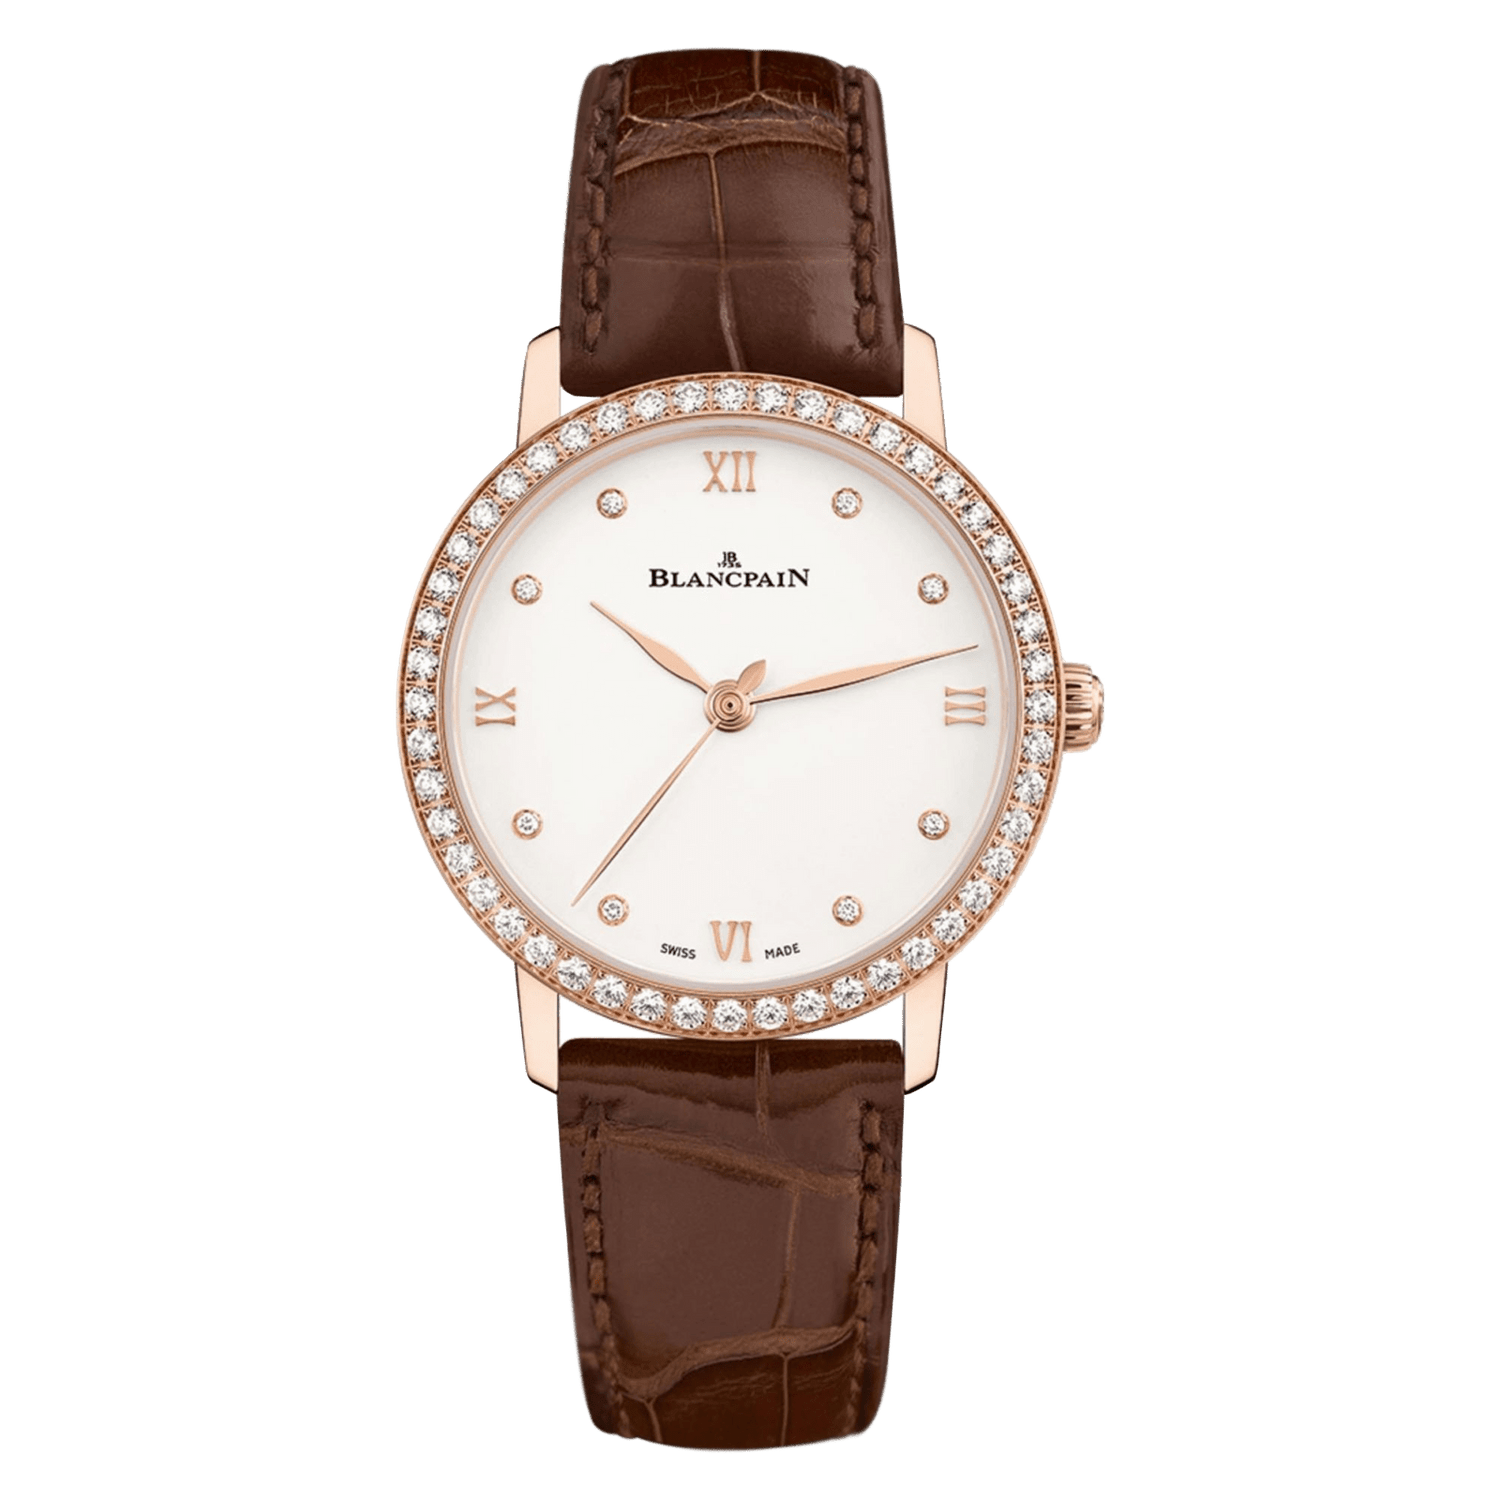 BLANCPAIN Women Manual Wind Stainless Steel White Round Dial Ladies Watch 6106 4628 55A